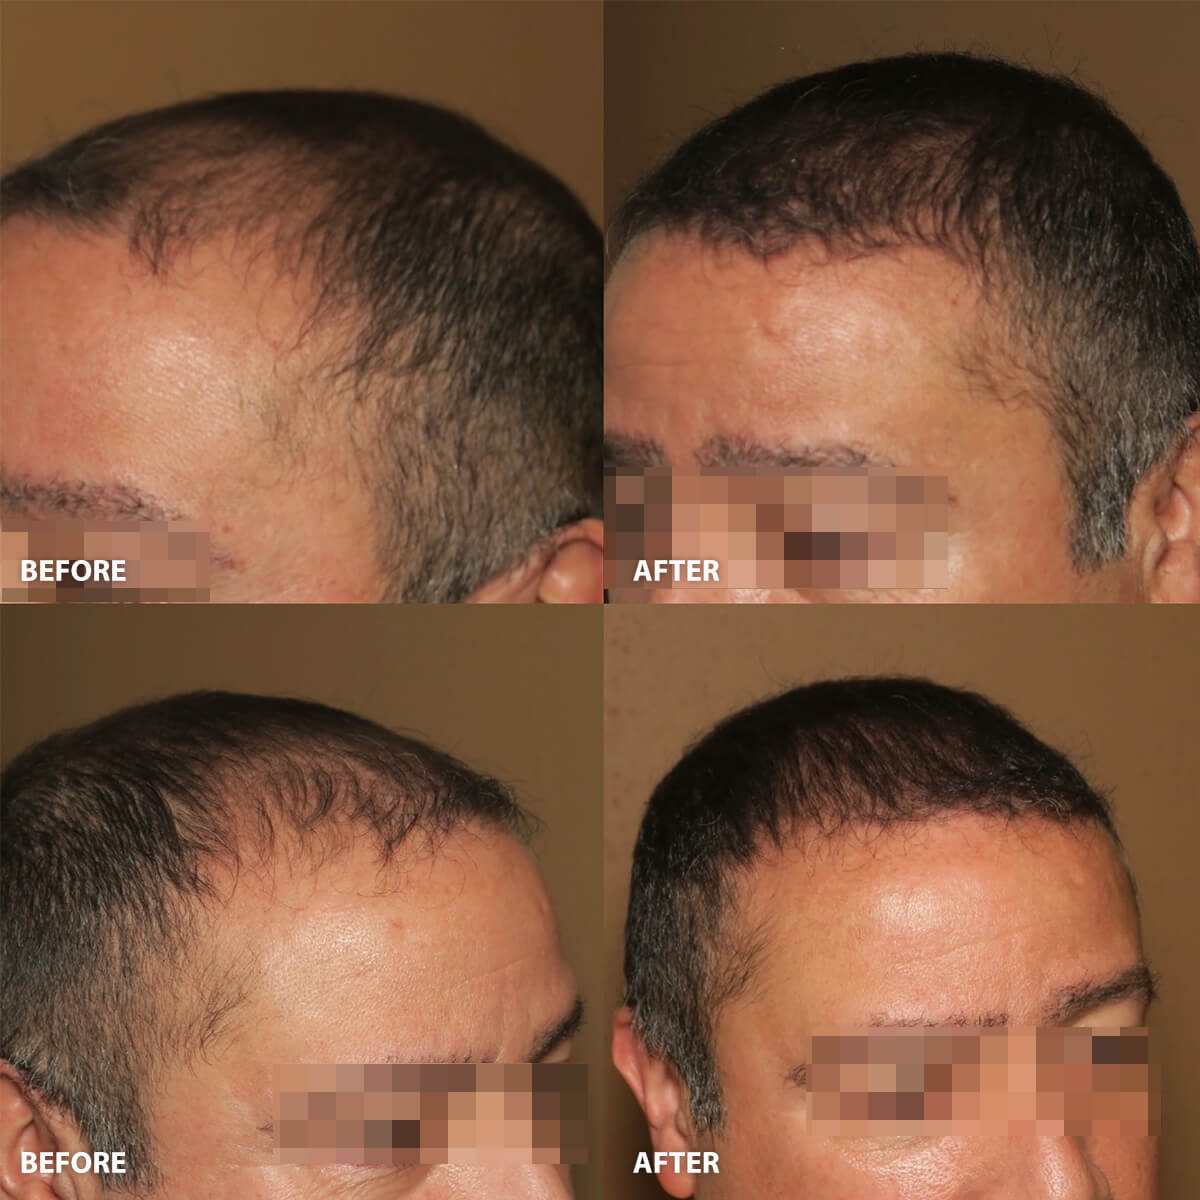 ARTAS Hair Transplantation - Before and After Pictures